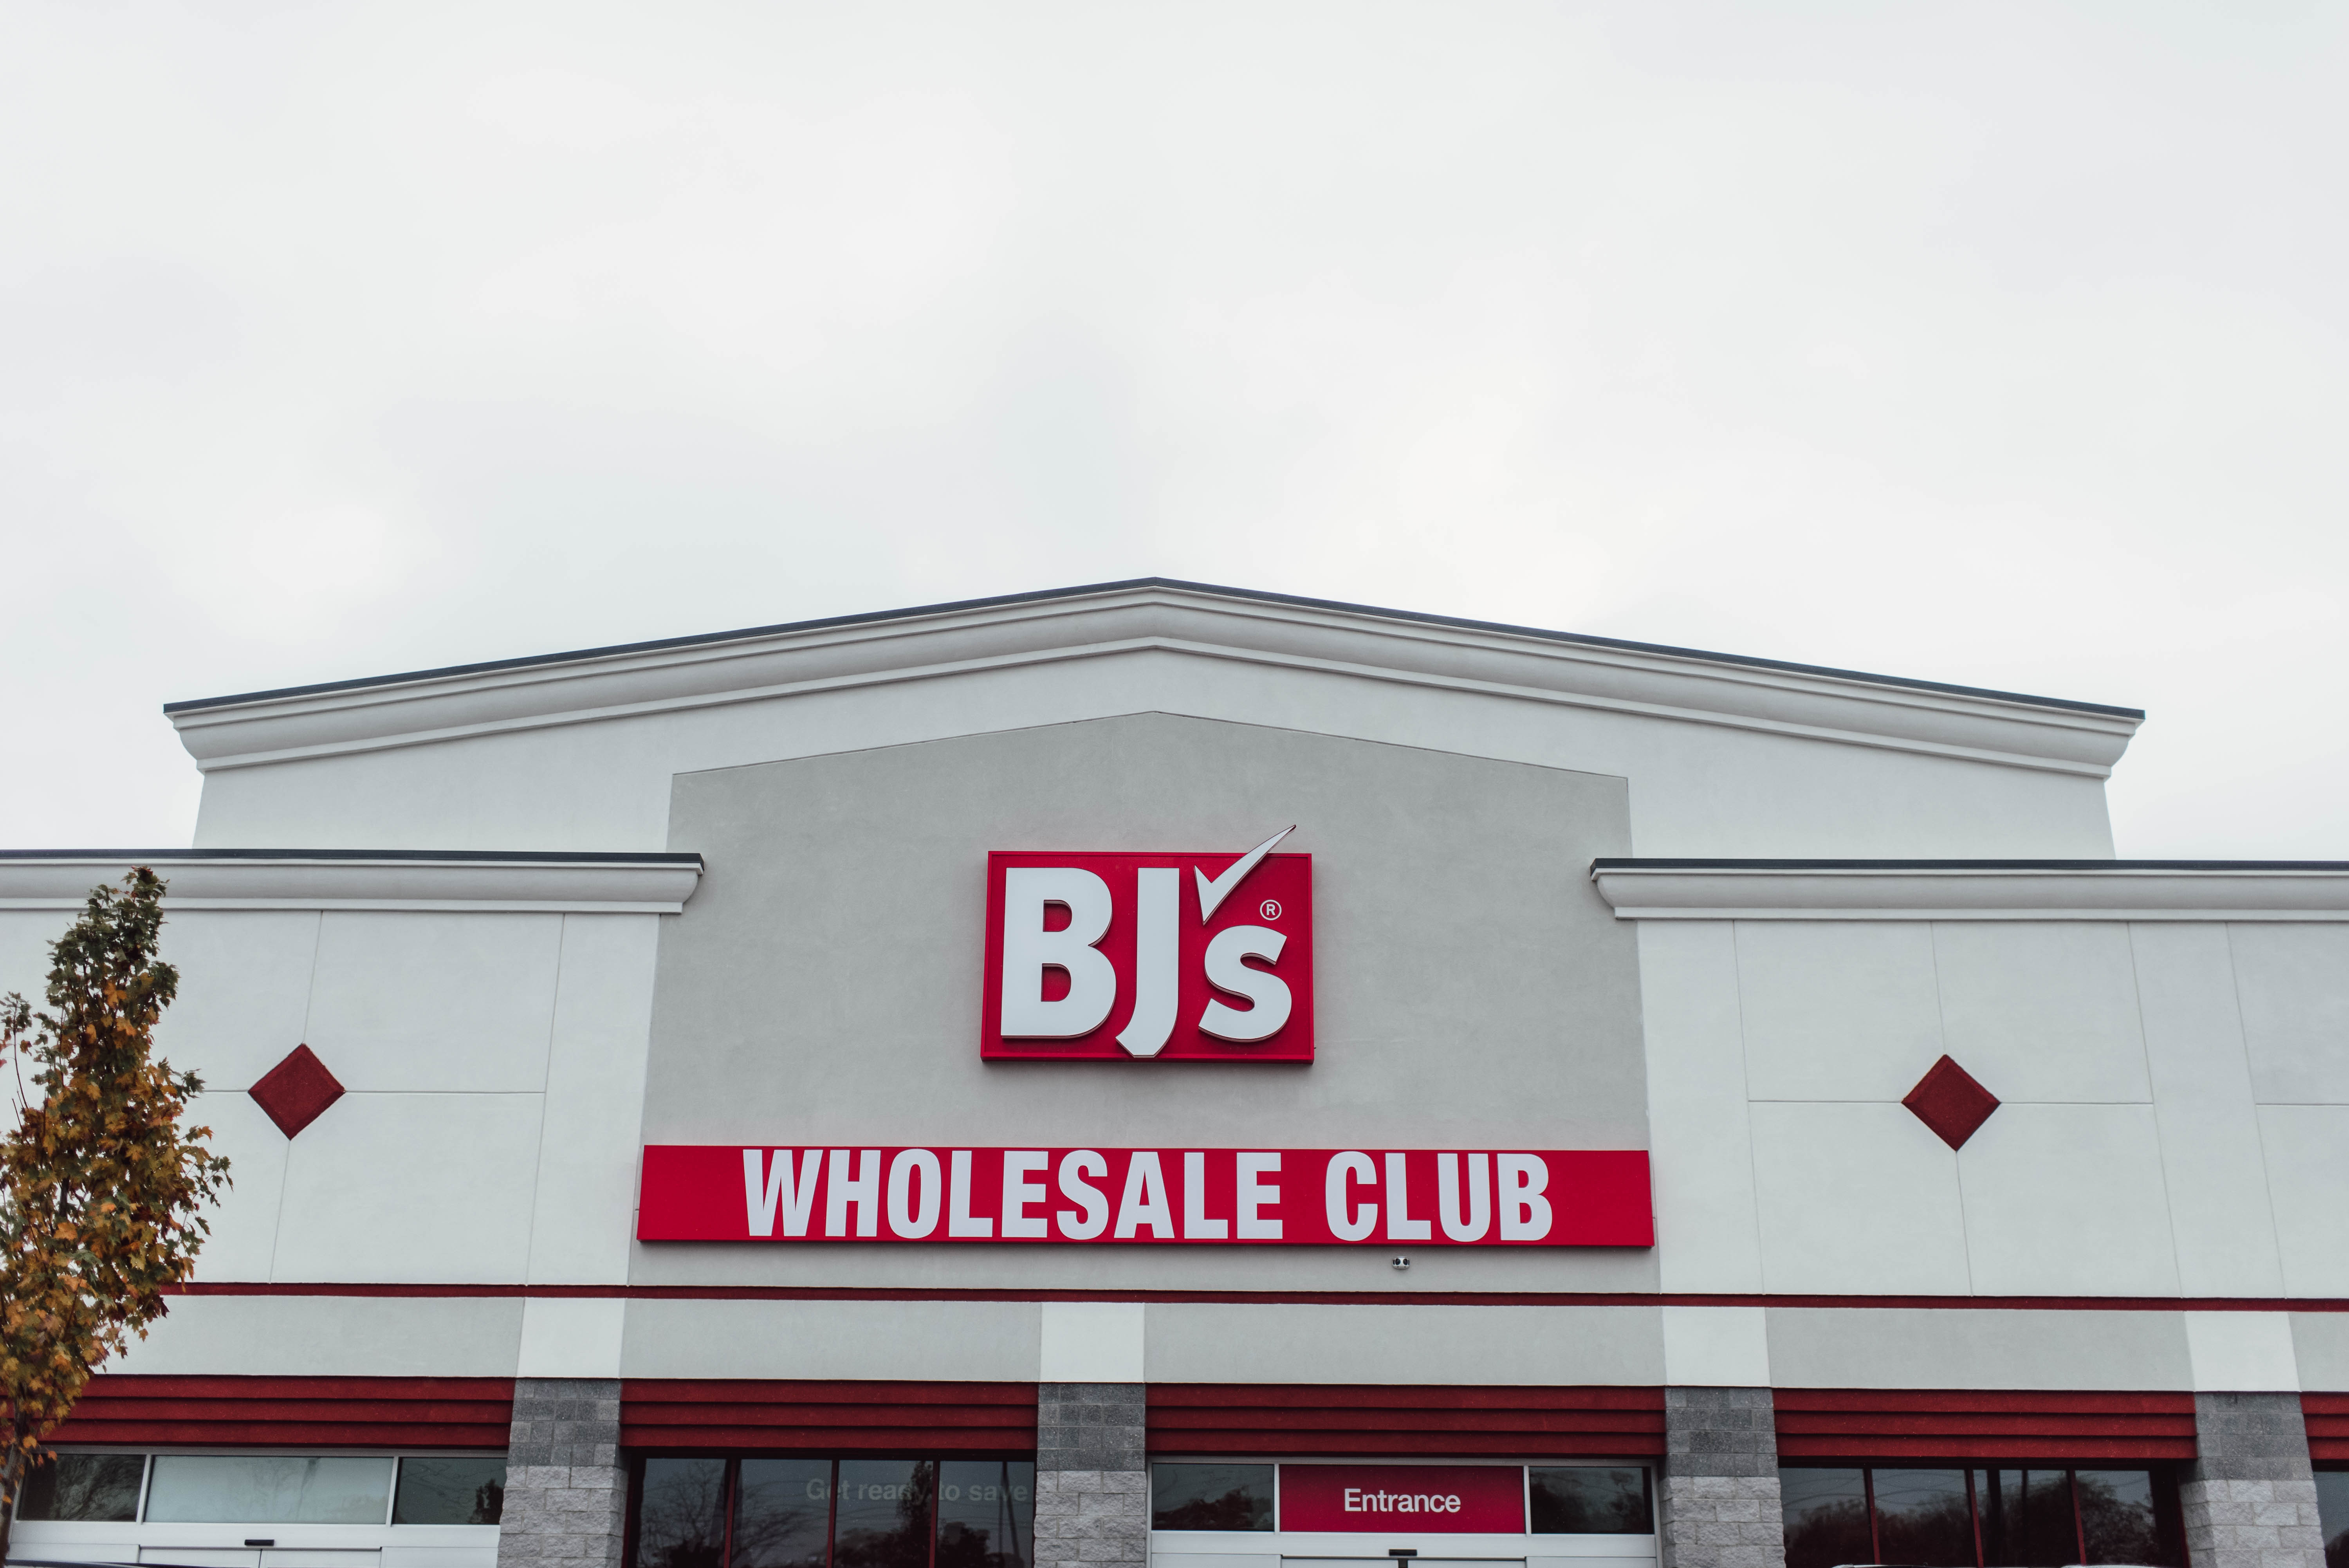 Bj S Wholesale Club Holds Grand Opening Celebrations At Its Two Michigan Clubs Business Wire